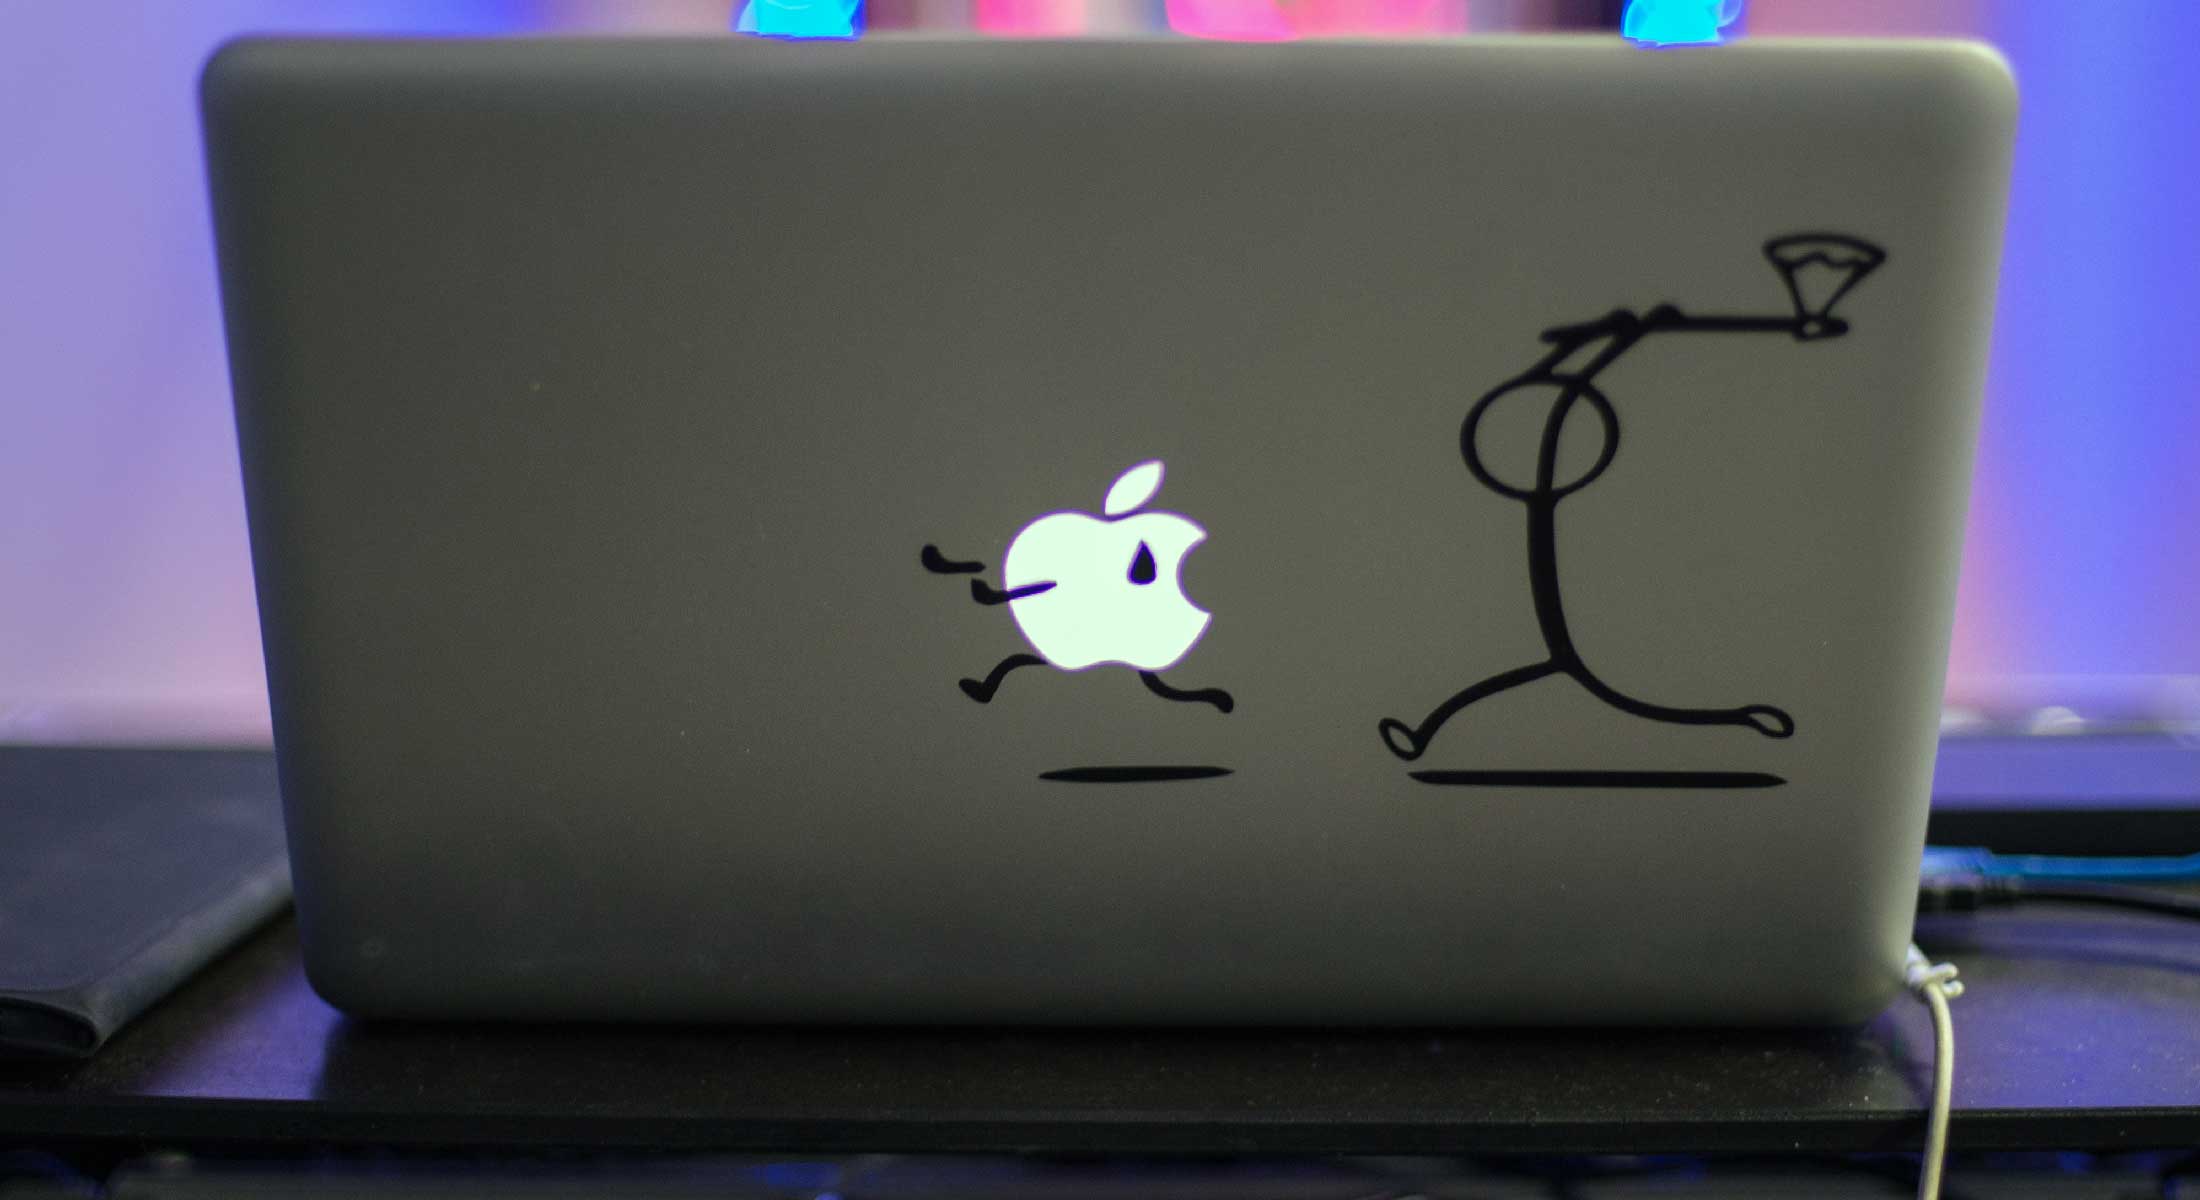 Image of back of Mac computer with sticker of ax man chasing the apple icon.